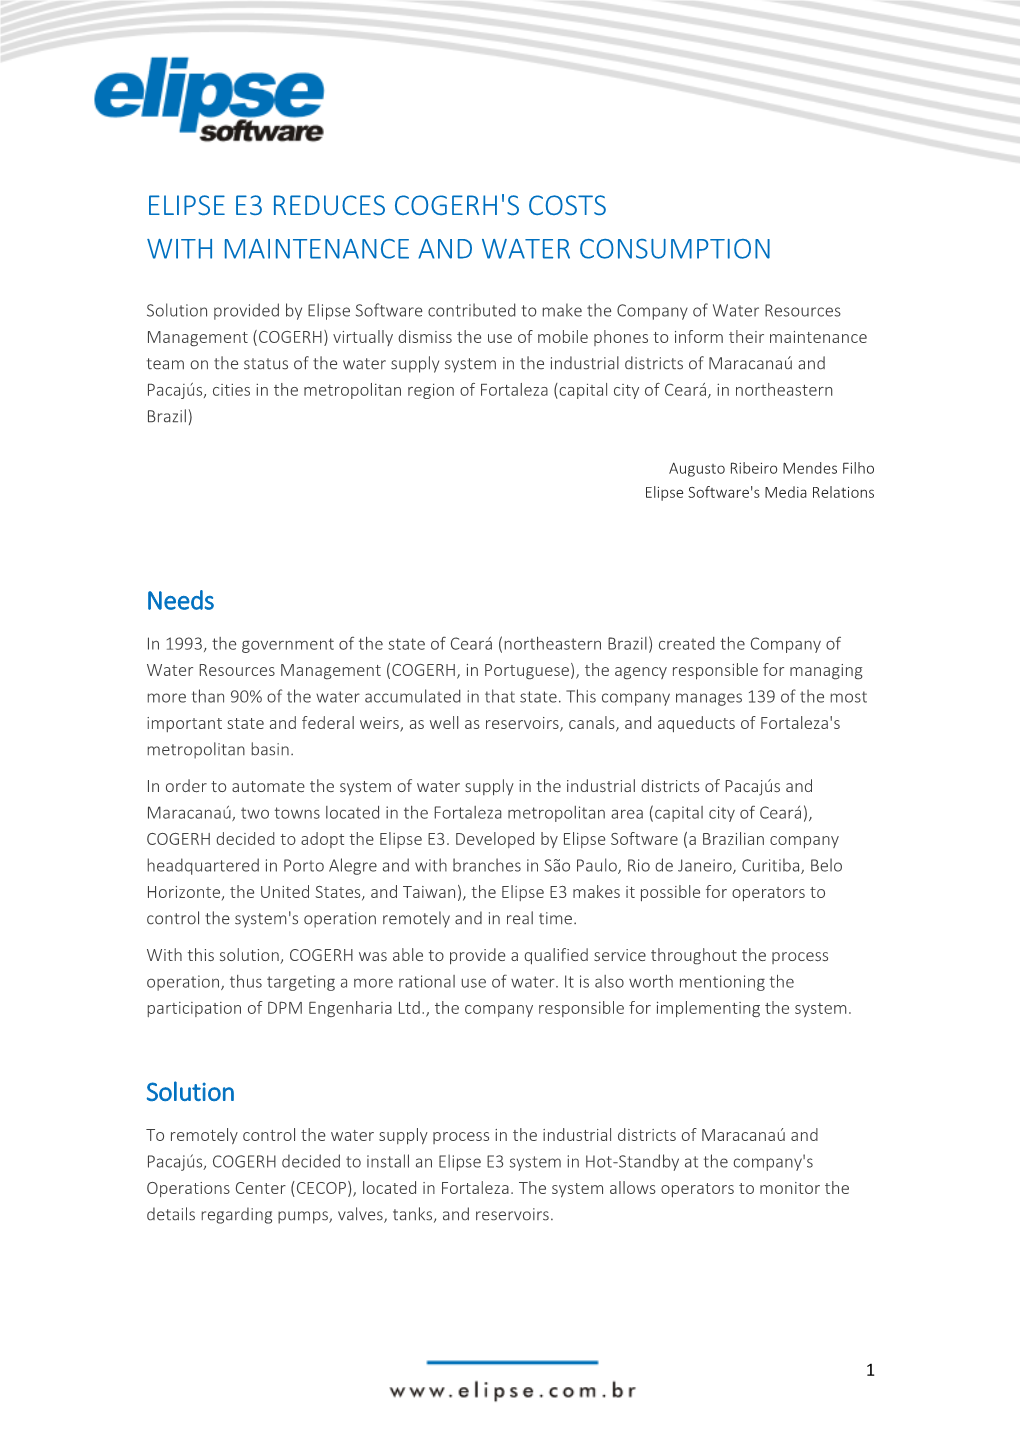 Elipse E3 Reduces Cogerh's Costs with Maintenance and Water Consumption